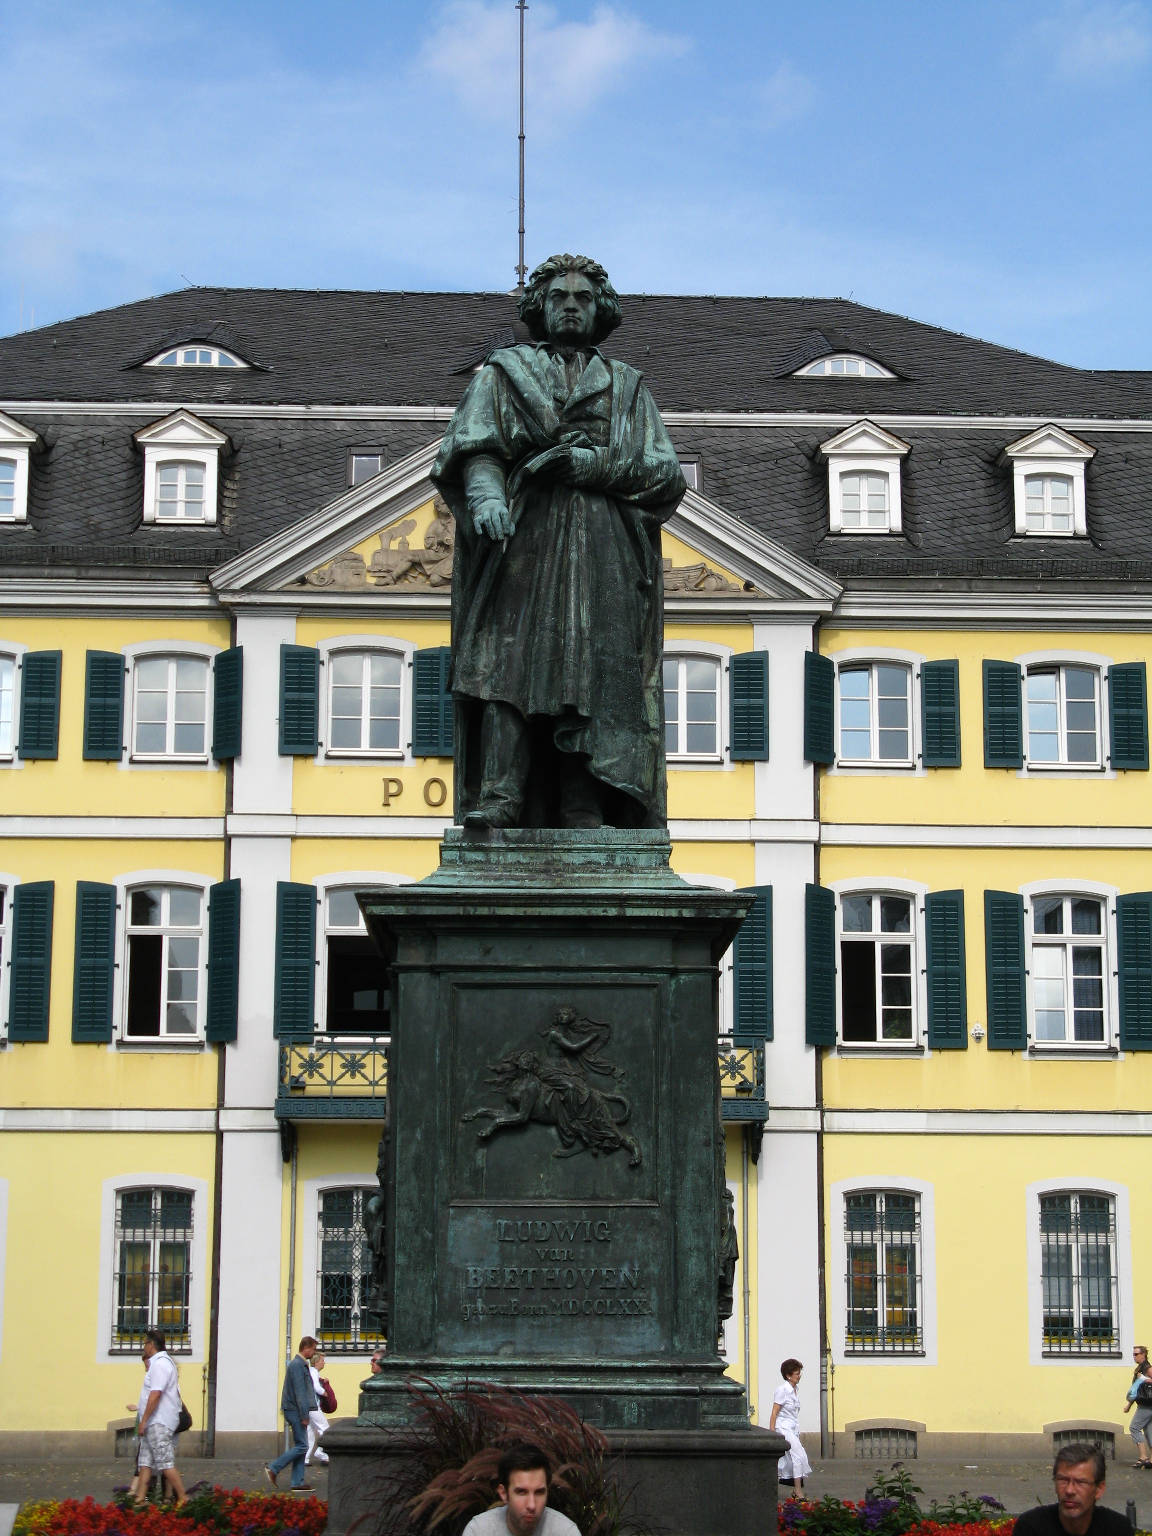 Beethoven's statue